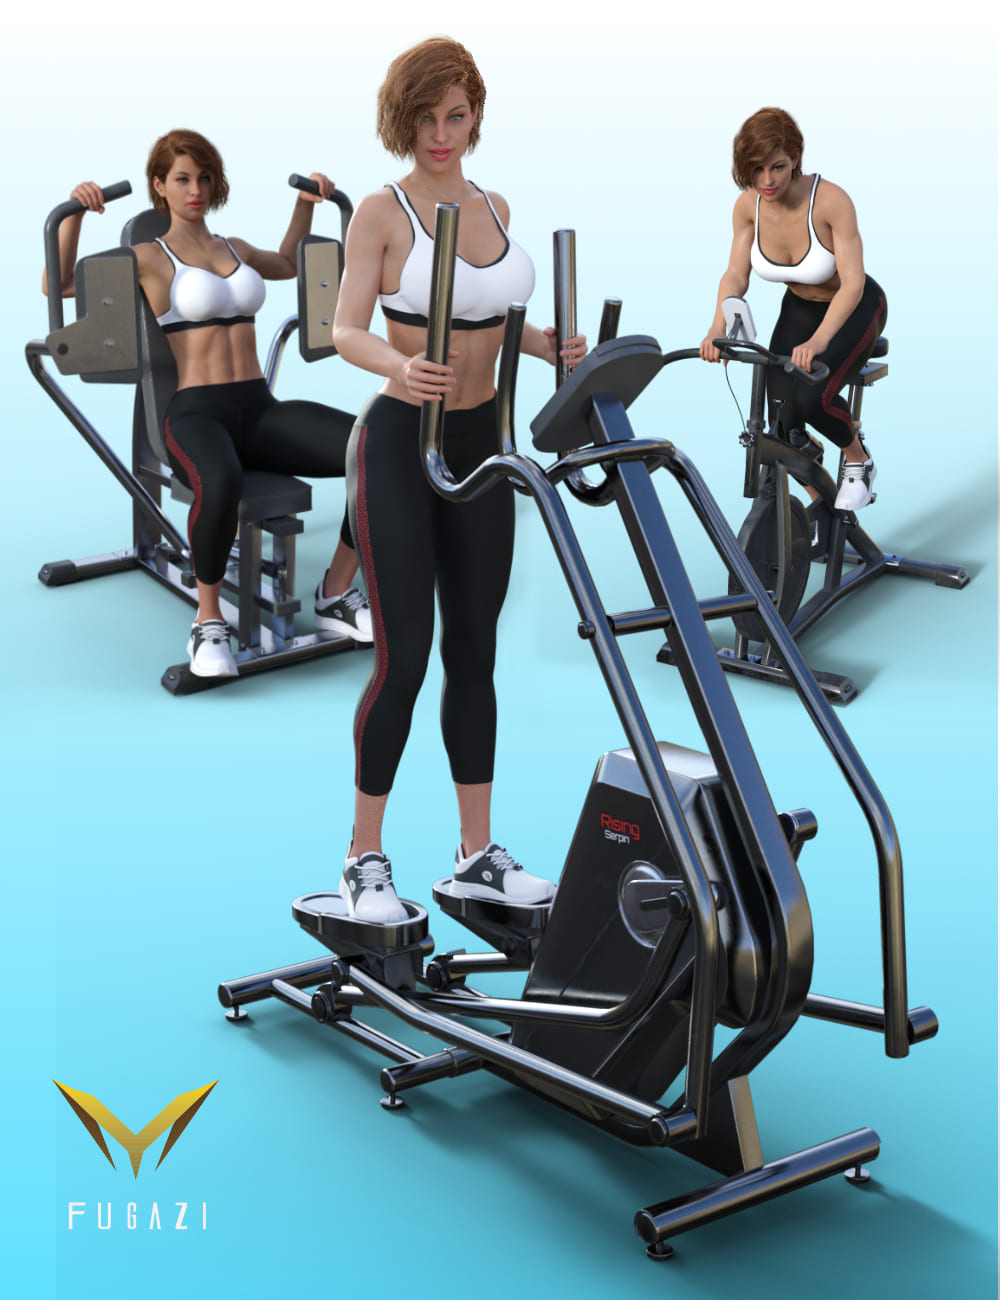 FG Fitness Equipment and Poses for Genesis 8 and 8.1 Females_DAZ3D下载站